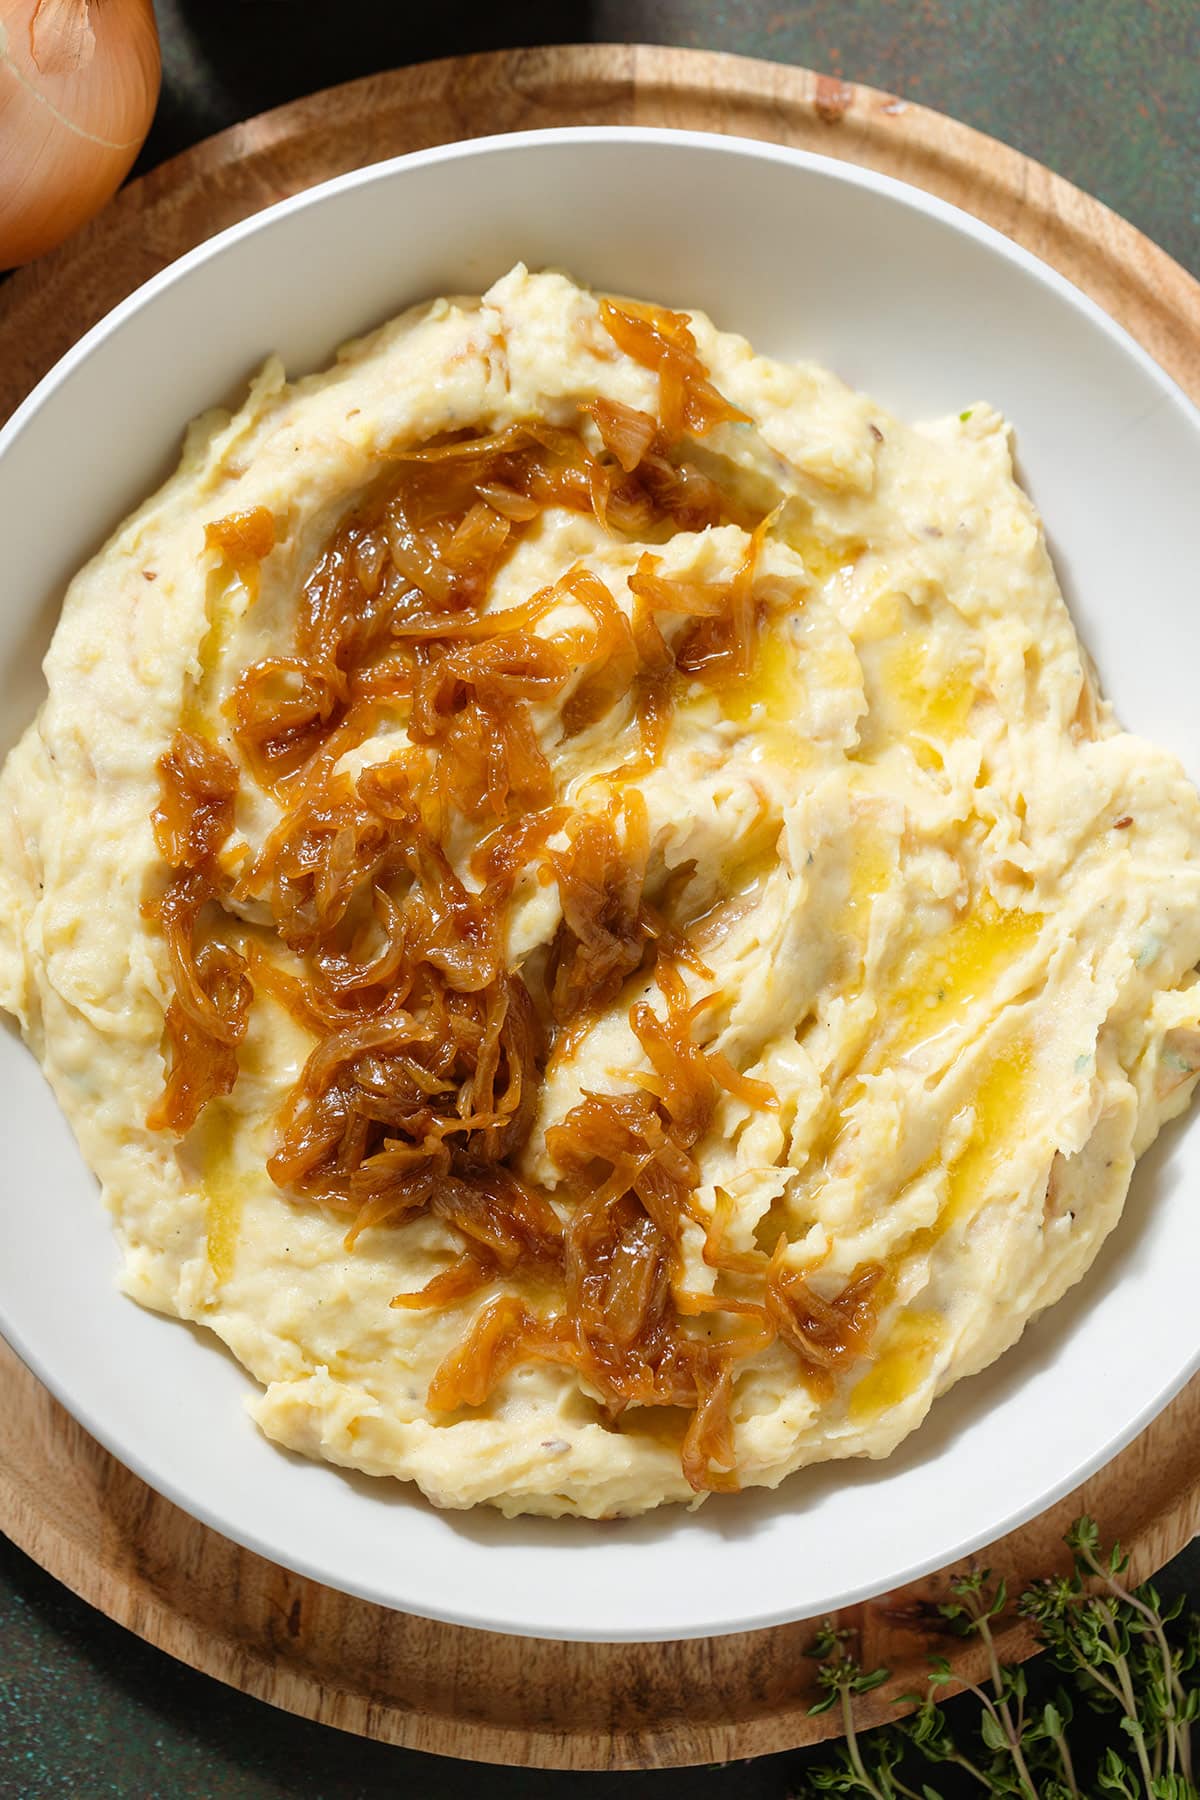 Mashed potatoes topped with caramelized onions in a white bowl on a wooden plate.